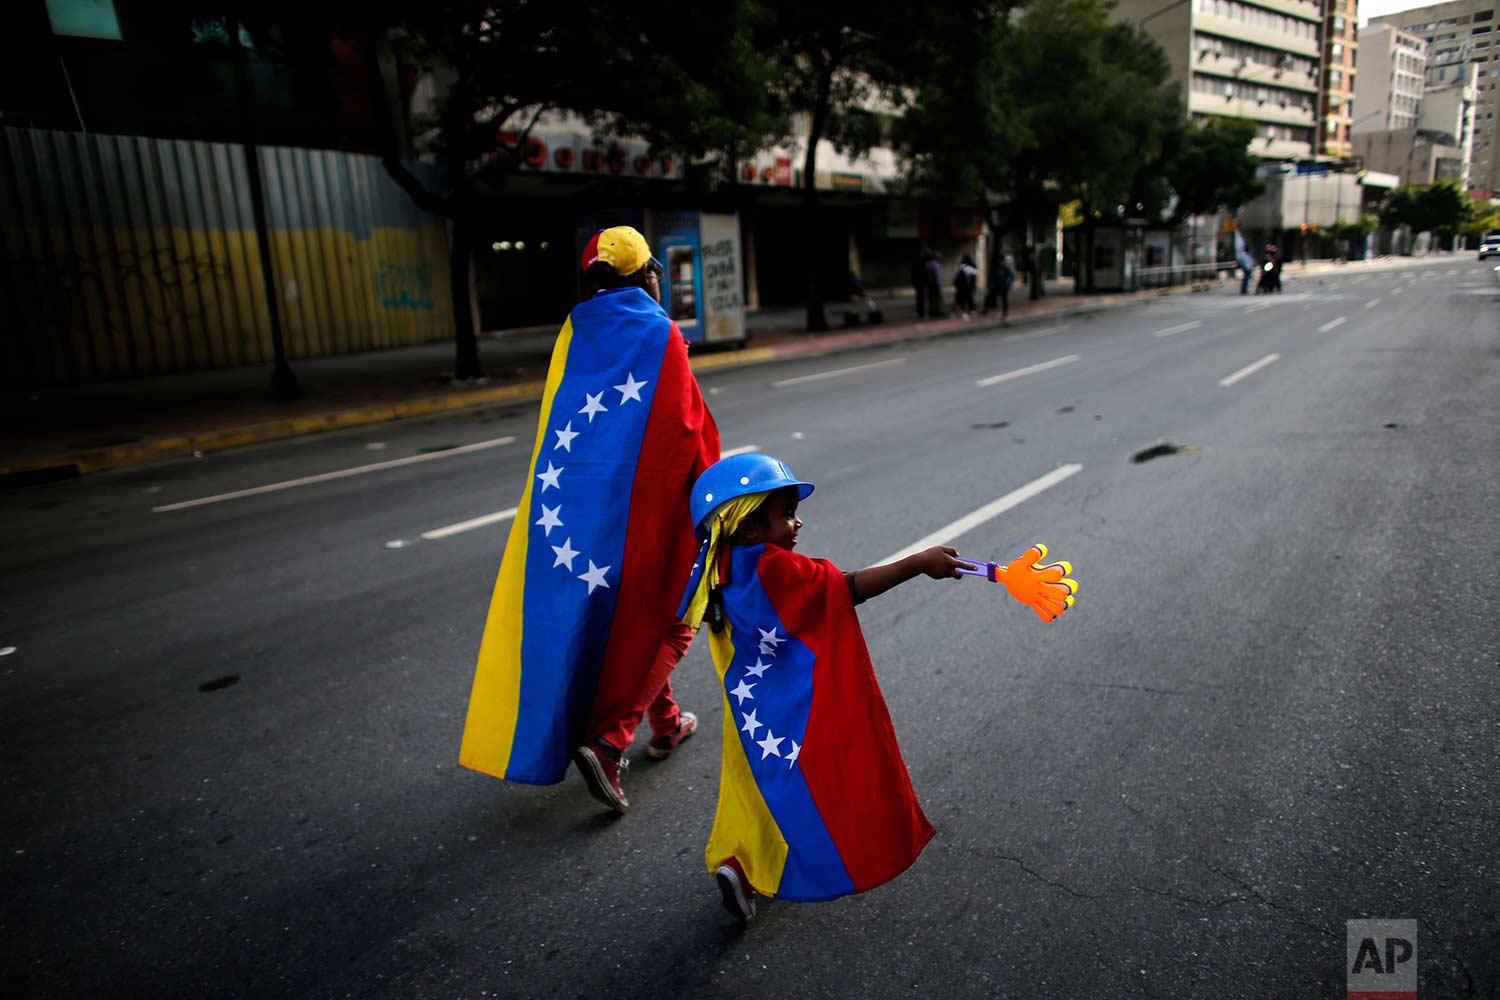 An anti-government demonstrator and her daughter wrapped in the Venezuelan flag walk on an empty street in Caracas, Venezuela, Sunday, July 30, 2017. (AP Photo/Ariana Cubillos)